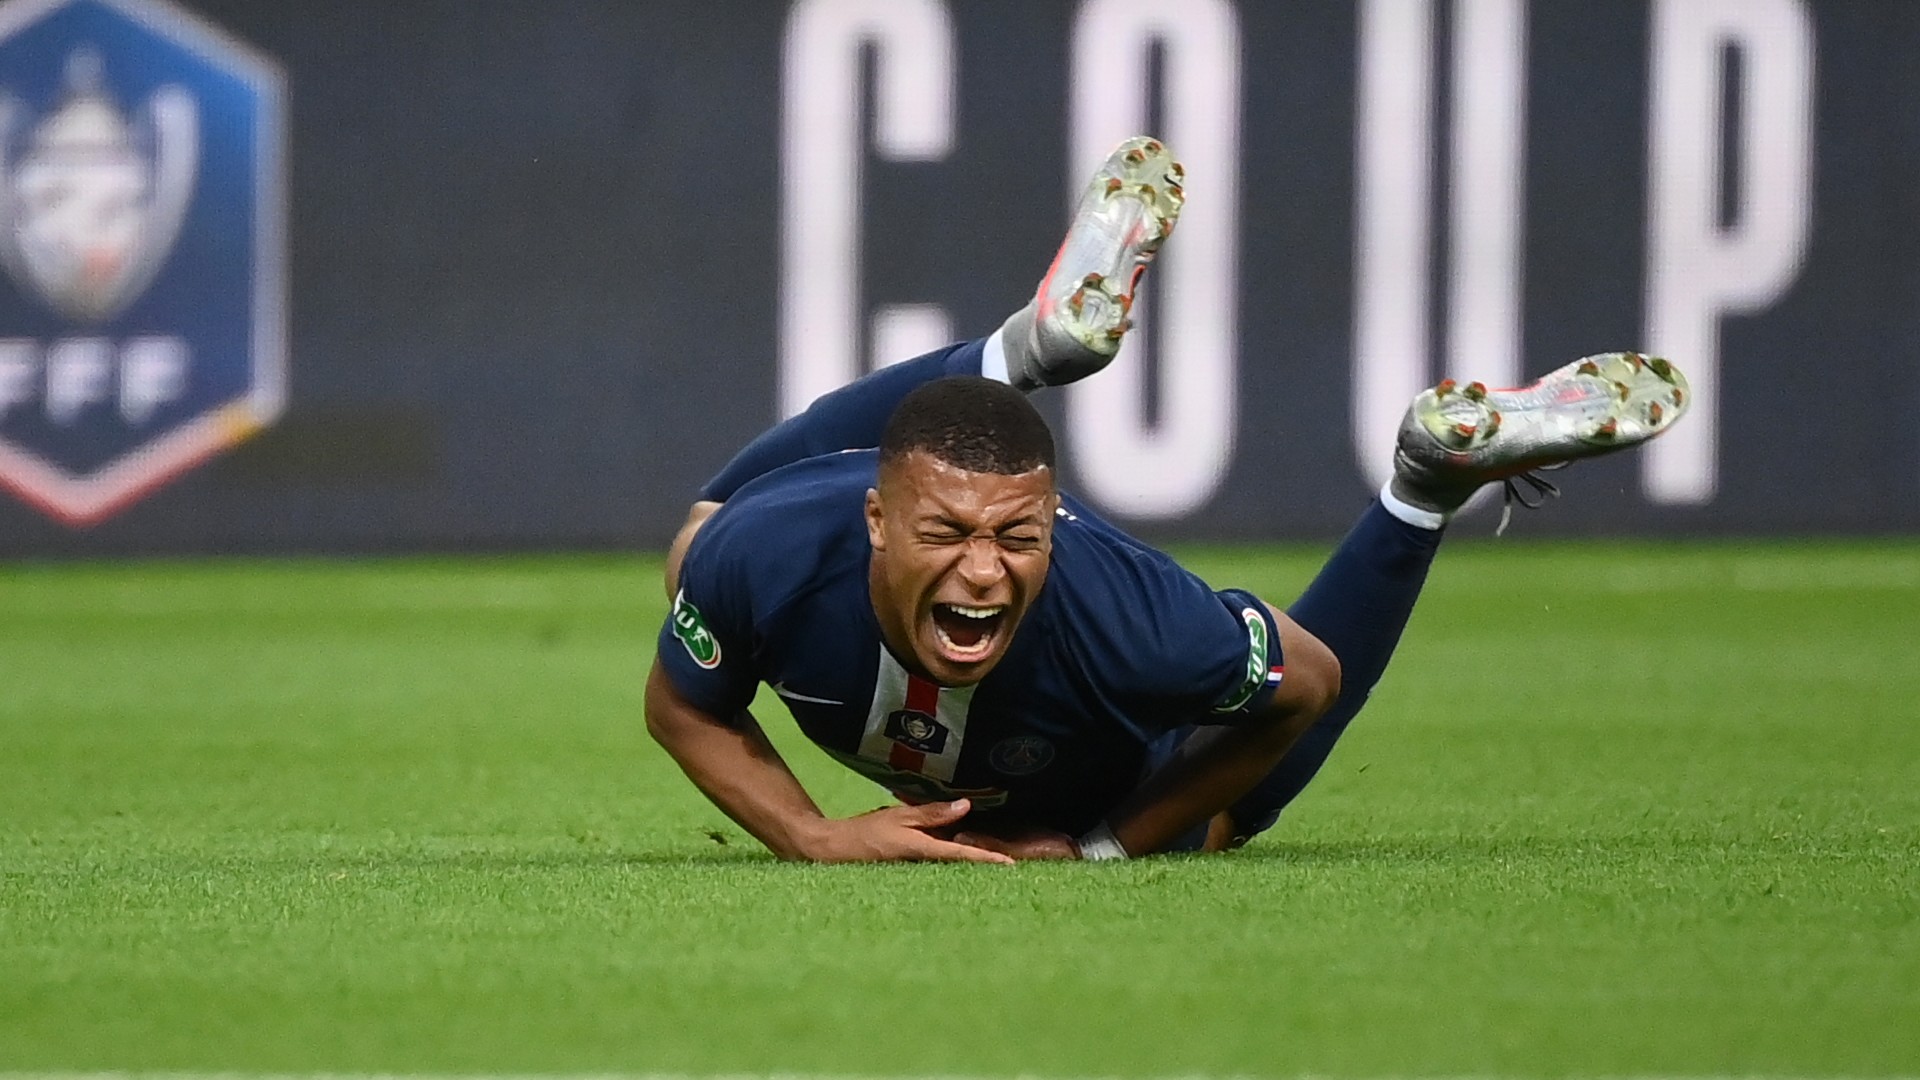 Mbappe forced out of Coupe de France final after horror tackle